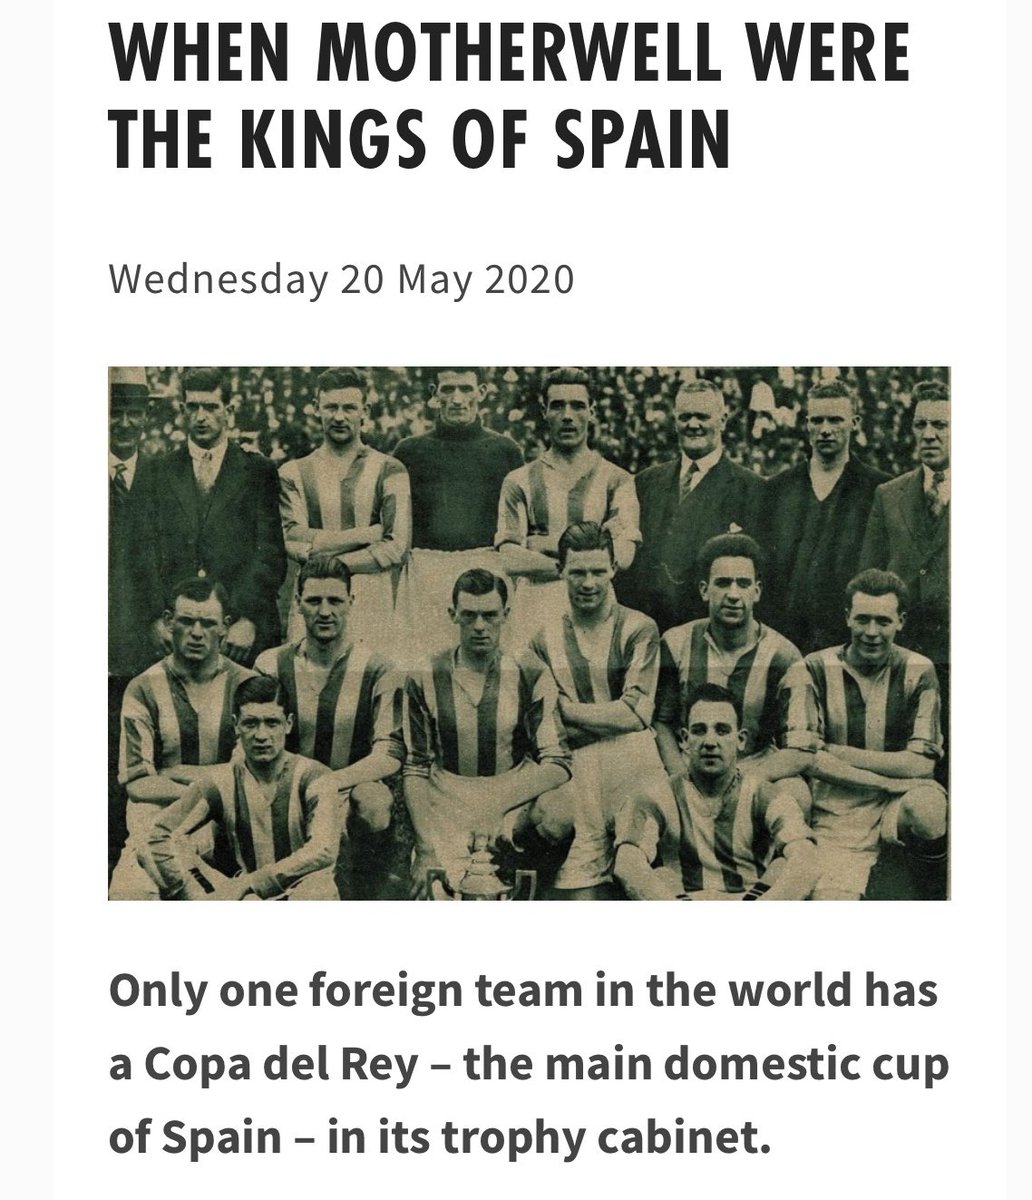 What is the strangest football fact that you can’t believe is true?

I’ll start 

Motherwell have won the Copa Del Rey